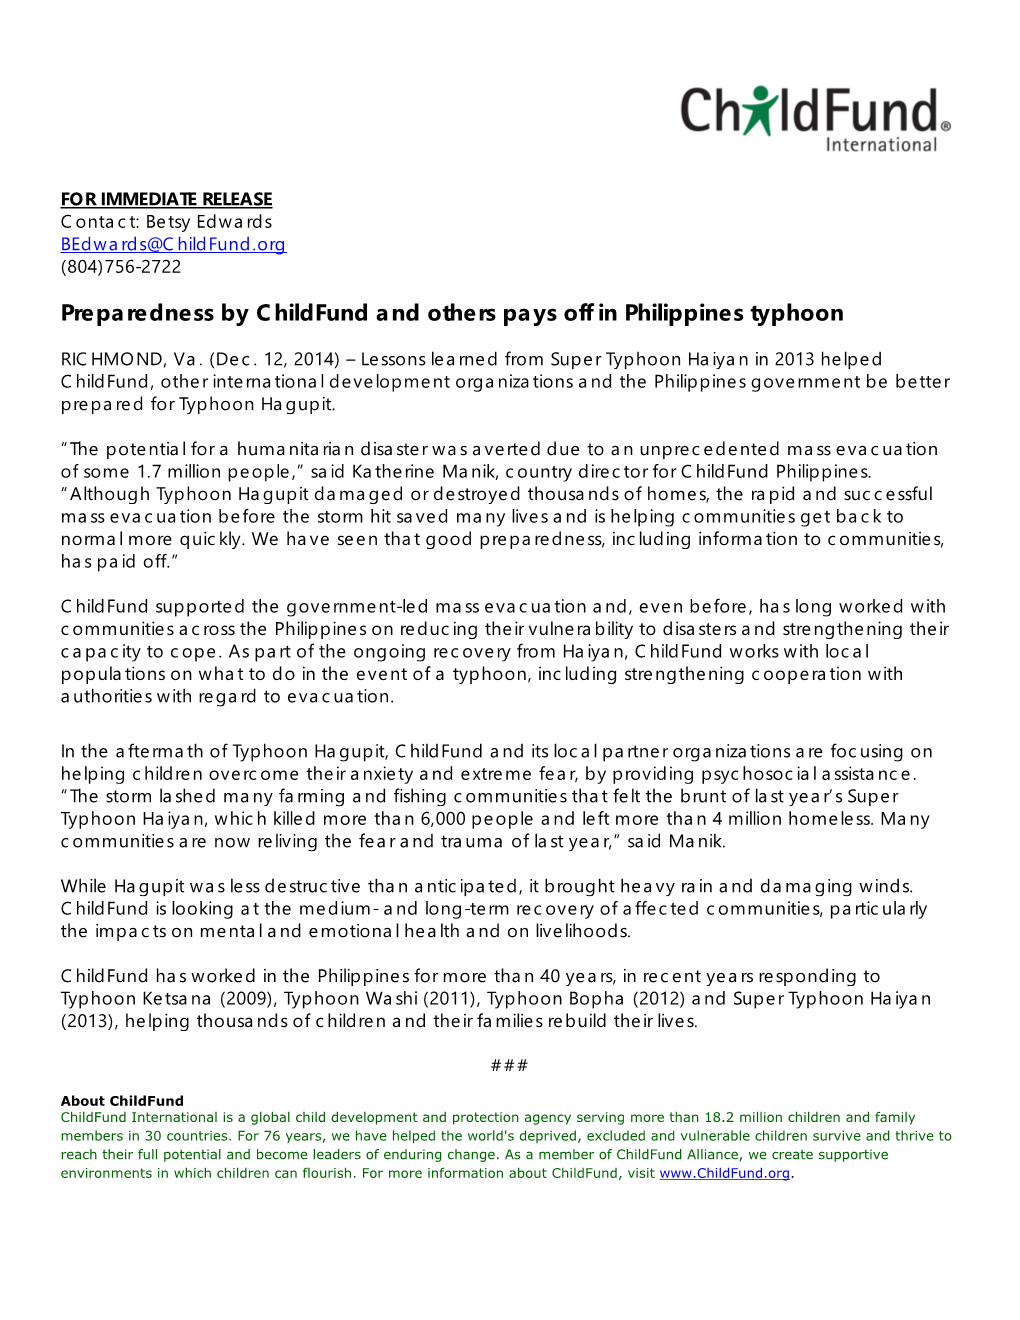 Preparedness by Childfund and Others Pays Off in Philippines Typhoon